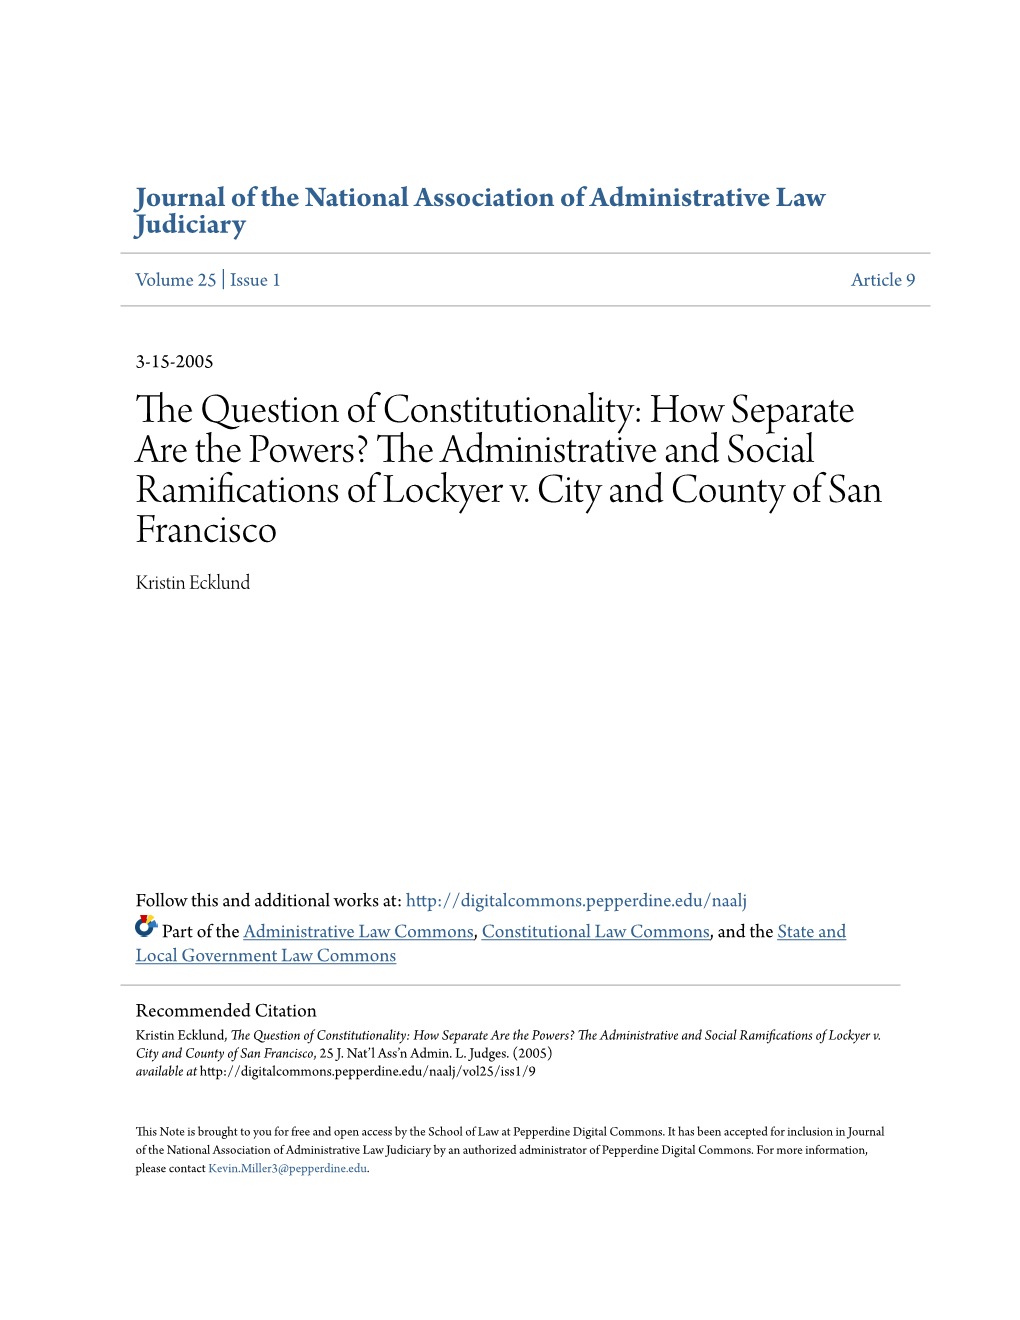 How Separate Are the Powers? the Administrative and Social Ramifications of Lockyer V. City and County of San Francisco Kristin Ecklund